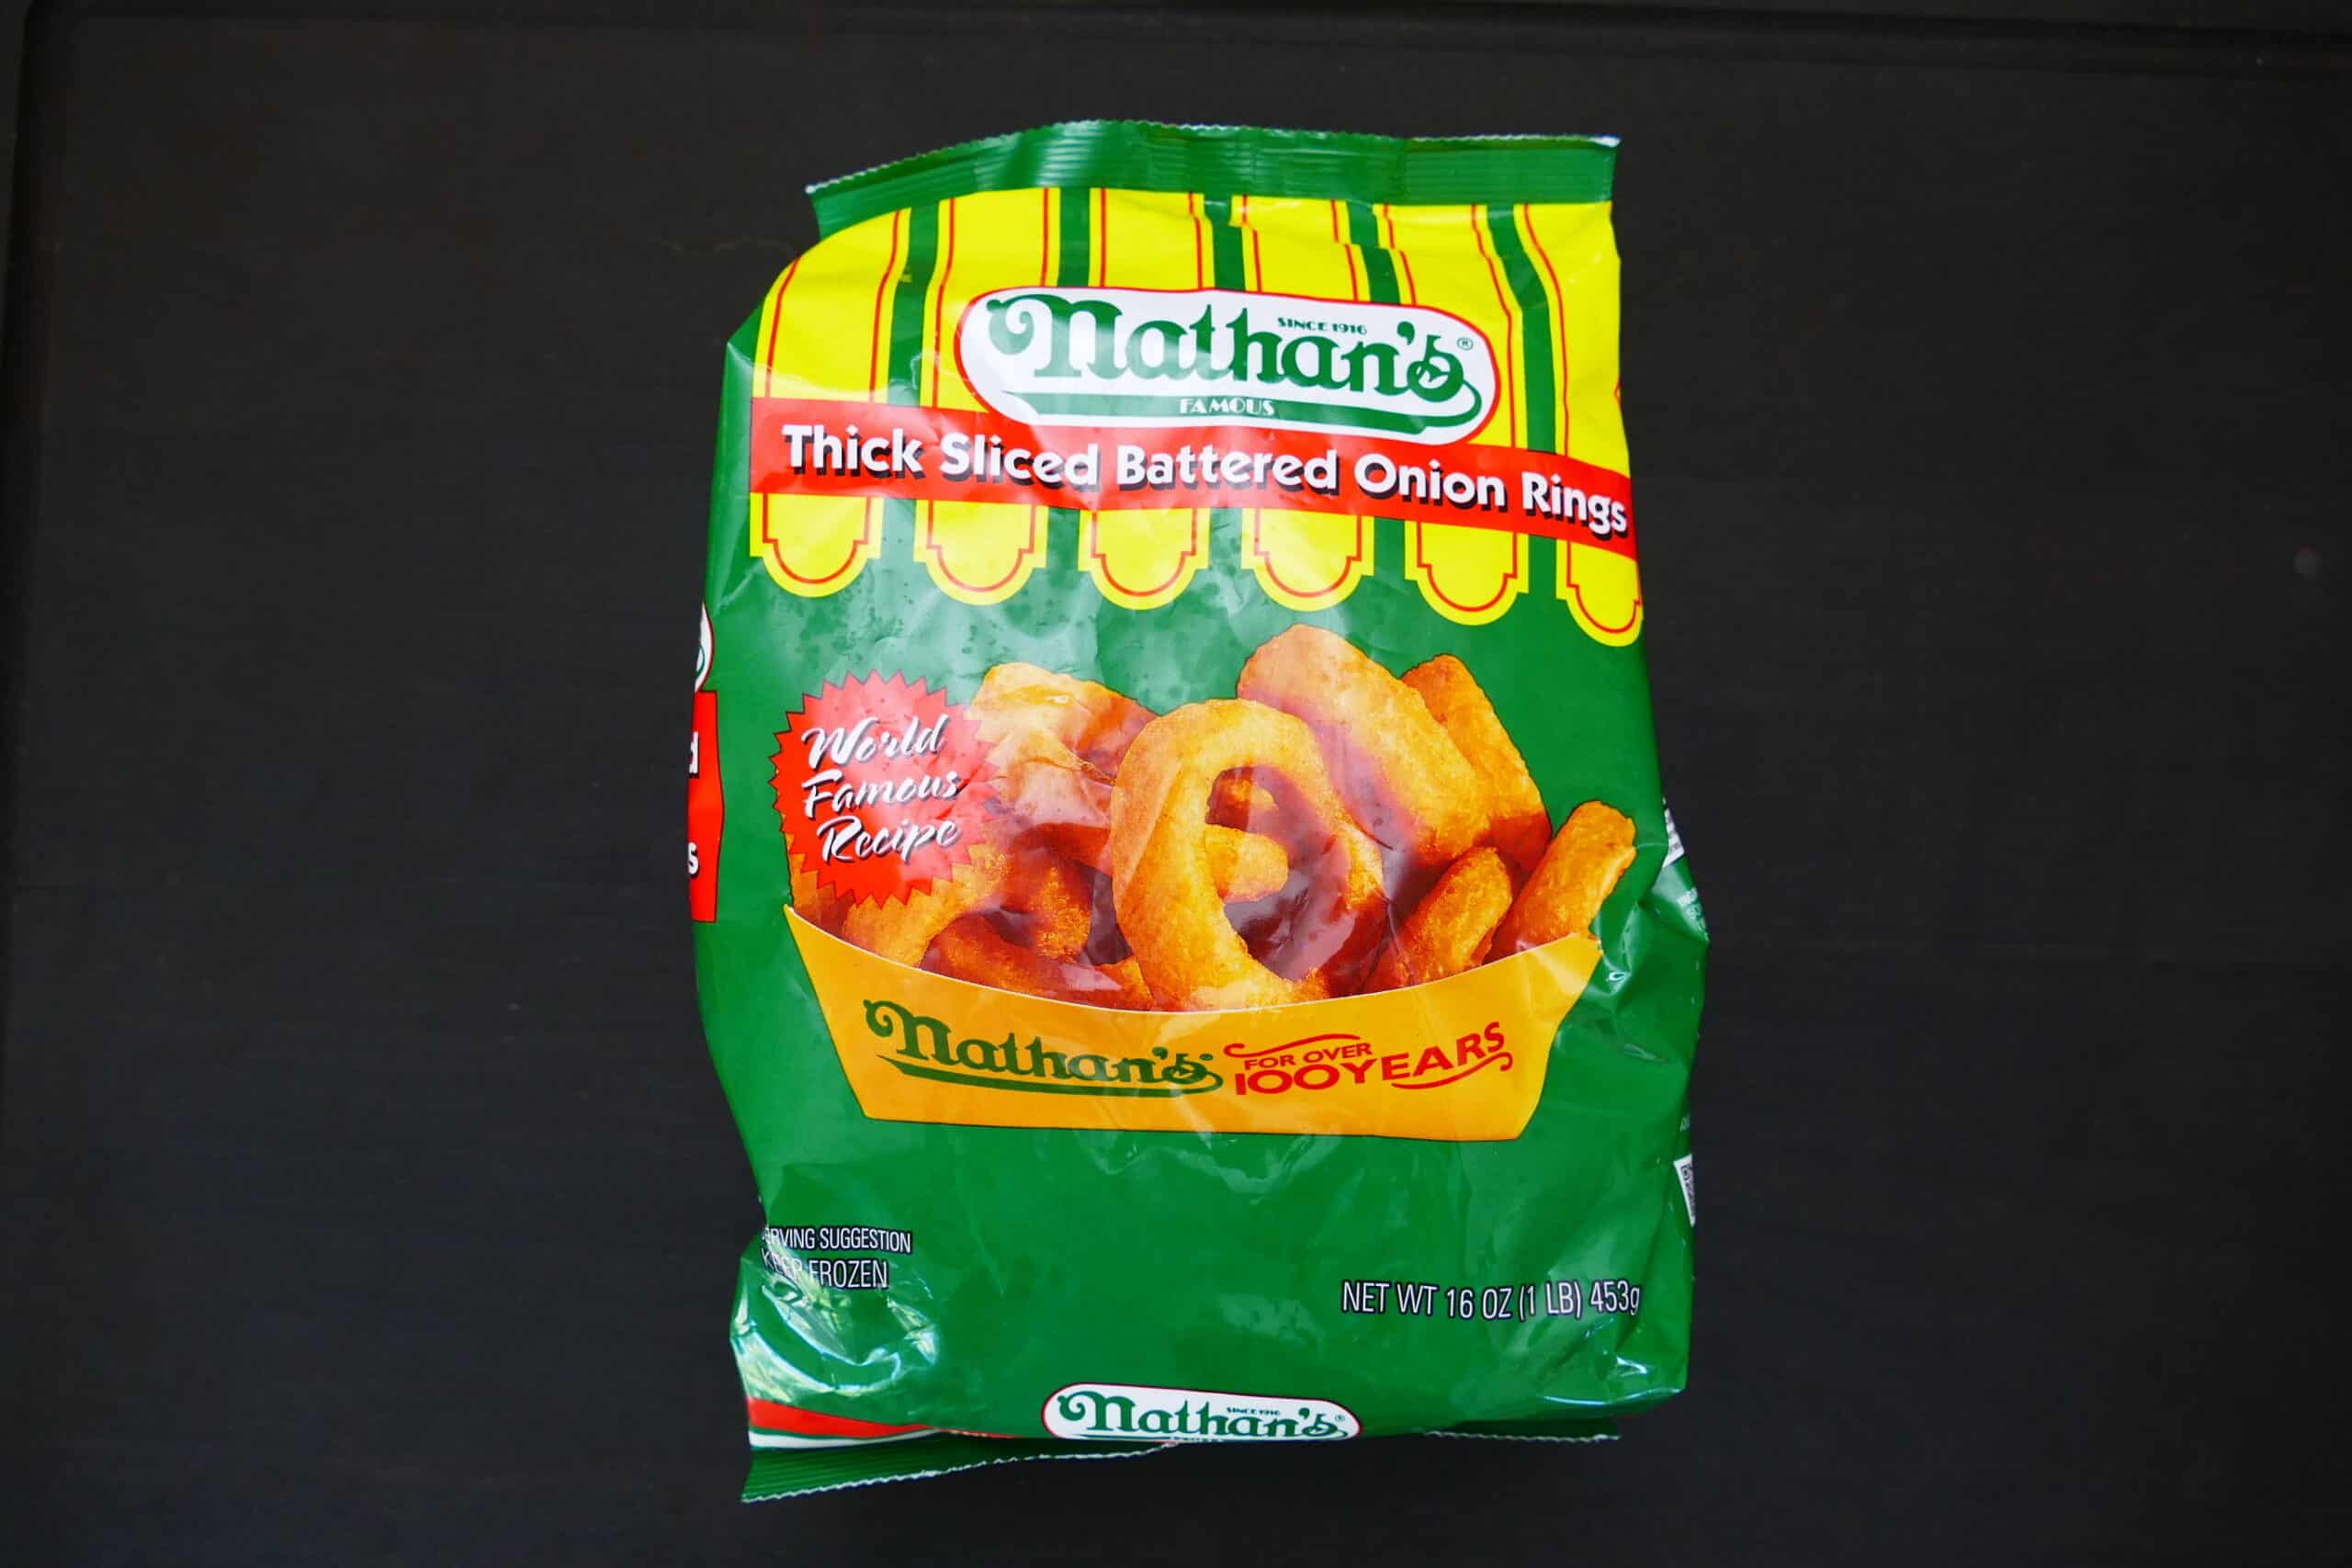 Bag of Nathan's thick sliced battered onion rings 16 oz.